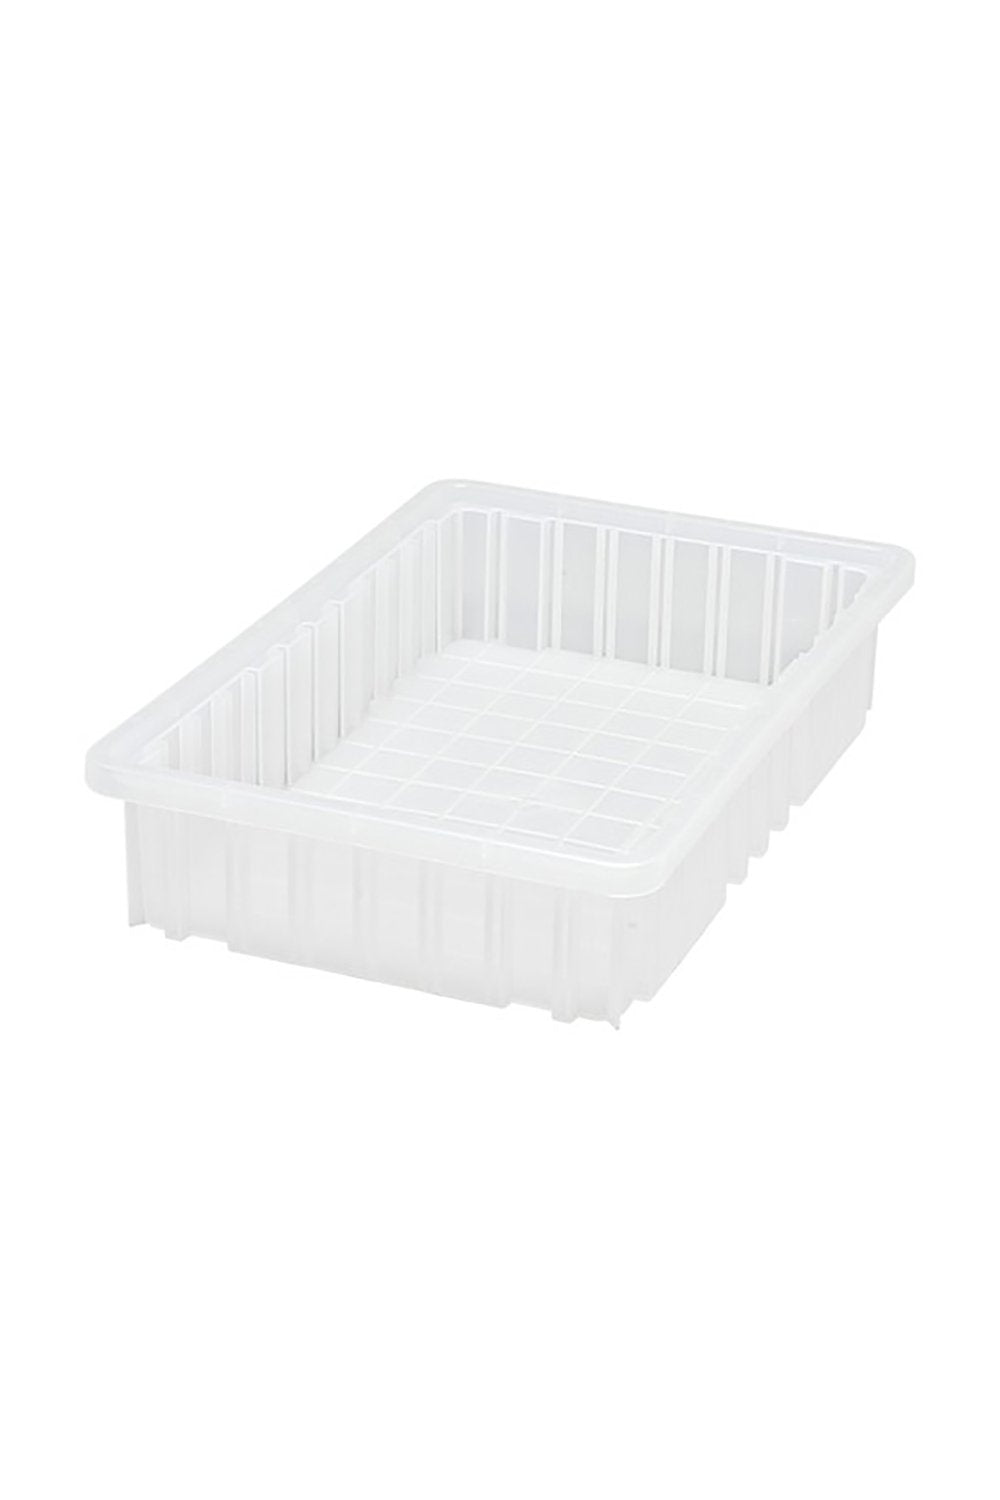 Clear View Dividable Grid Container Bins & Containers Acart 16-1/2"L x 10-7/8"W x 3-1/2"H Clear 